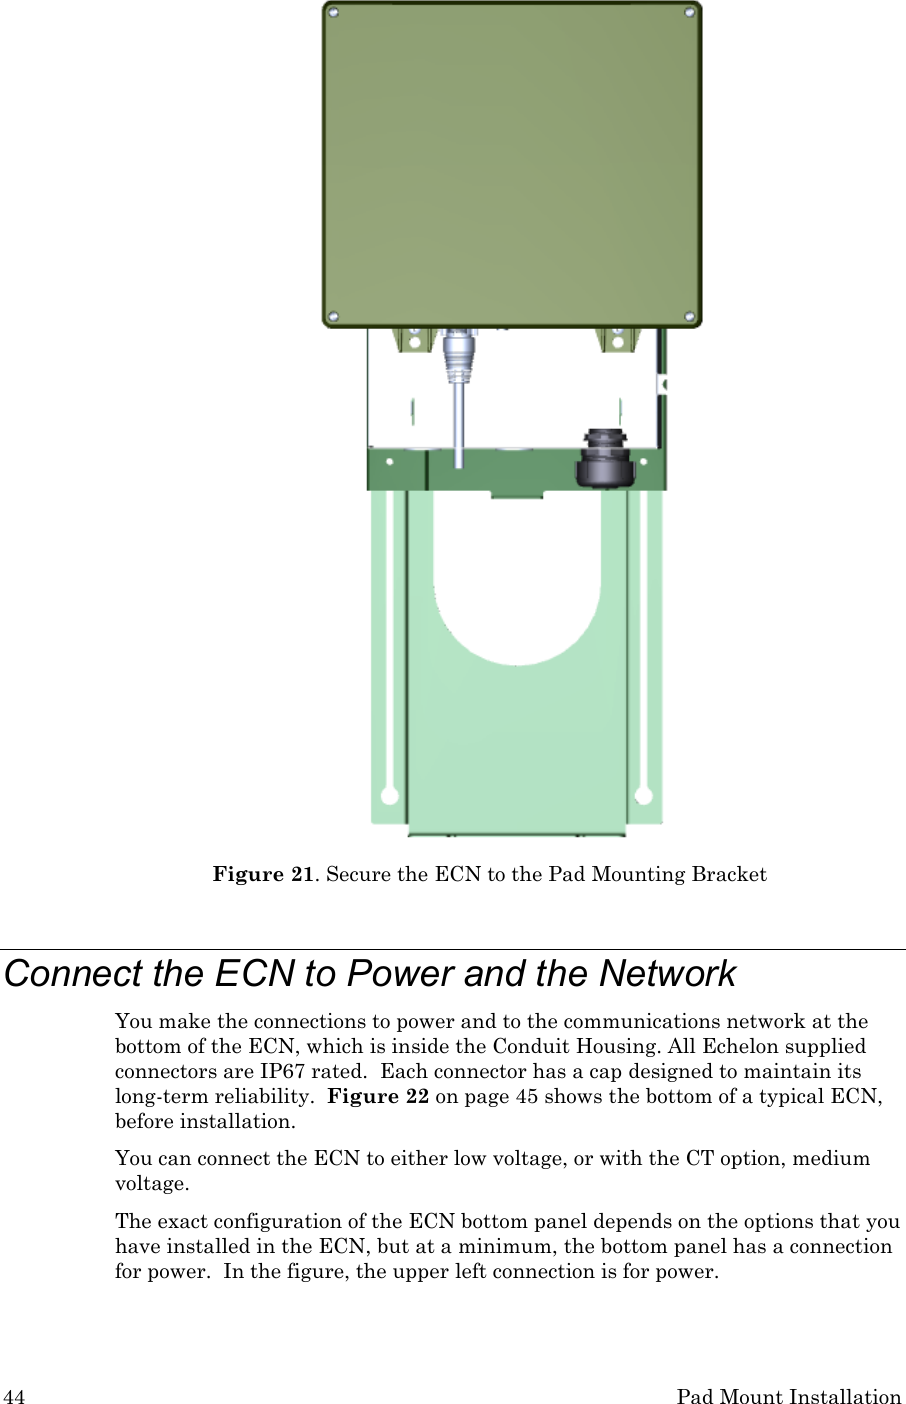 44 Pad Mount Installation  Figure 21. Secure the ECN to the Pad Mounting Bracket  Connect the ECN to Power and the Network You make the connections to power and to the communications network at the bottom of the ECN, which is inside the Conduit Housing. All Echelon supplied connectors are IP67 rated.  Each connector has a cap designed to maintain its long-term reliability.  Figure 22 on page 45 shows the bottom of a typical ECN, before installation.   You can connect the ECN to either low voltage, or with the CT option, medium voltage. The exact configuration of the ECN bottom panel depends on the options that you have installed in the ECN, but at a minimum, the bottom panel has a connection for power.  In the figure, the upper left connection is for power. 